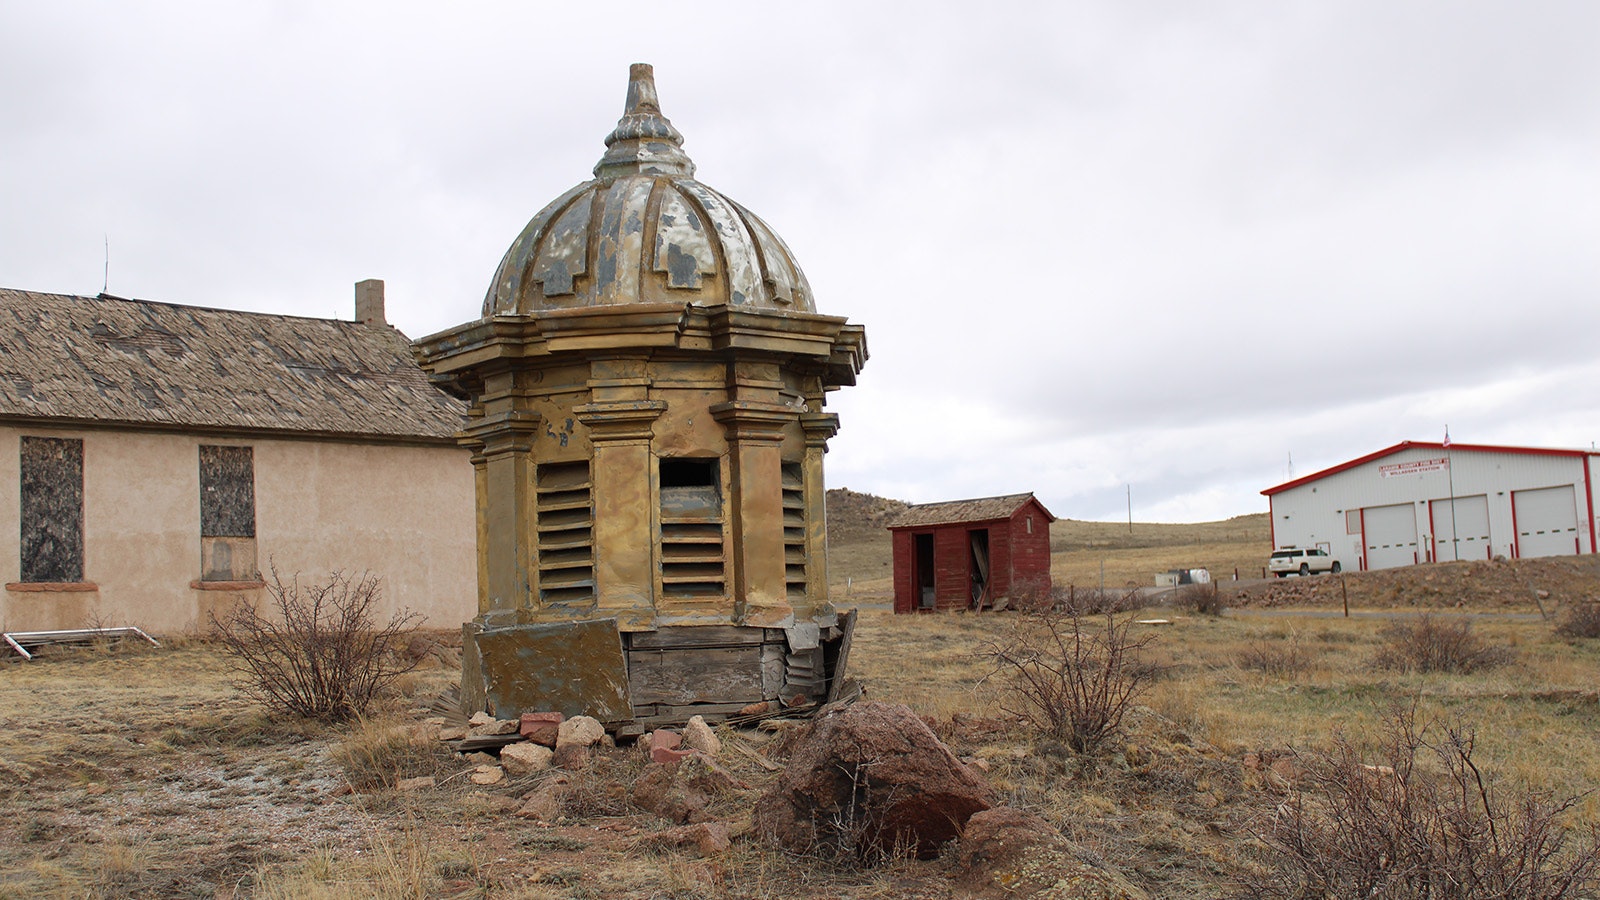 One of two original 1917 Wyoming Capitol domes sits in on property west of Cheyenne near an old one-room schoolhouse.